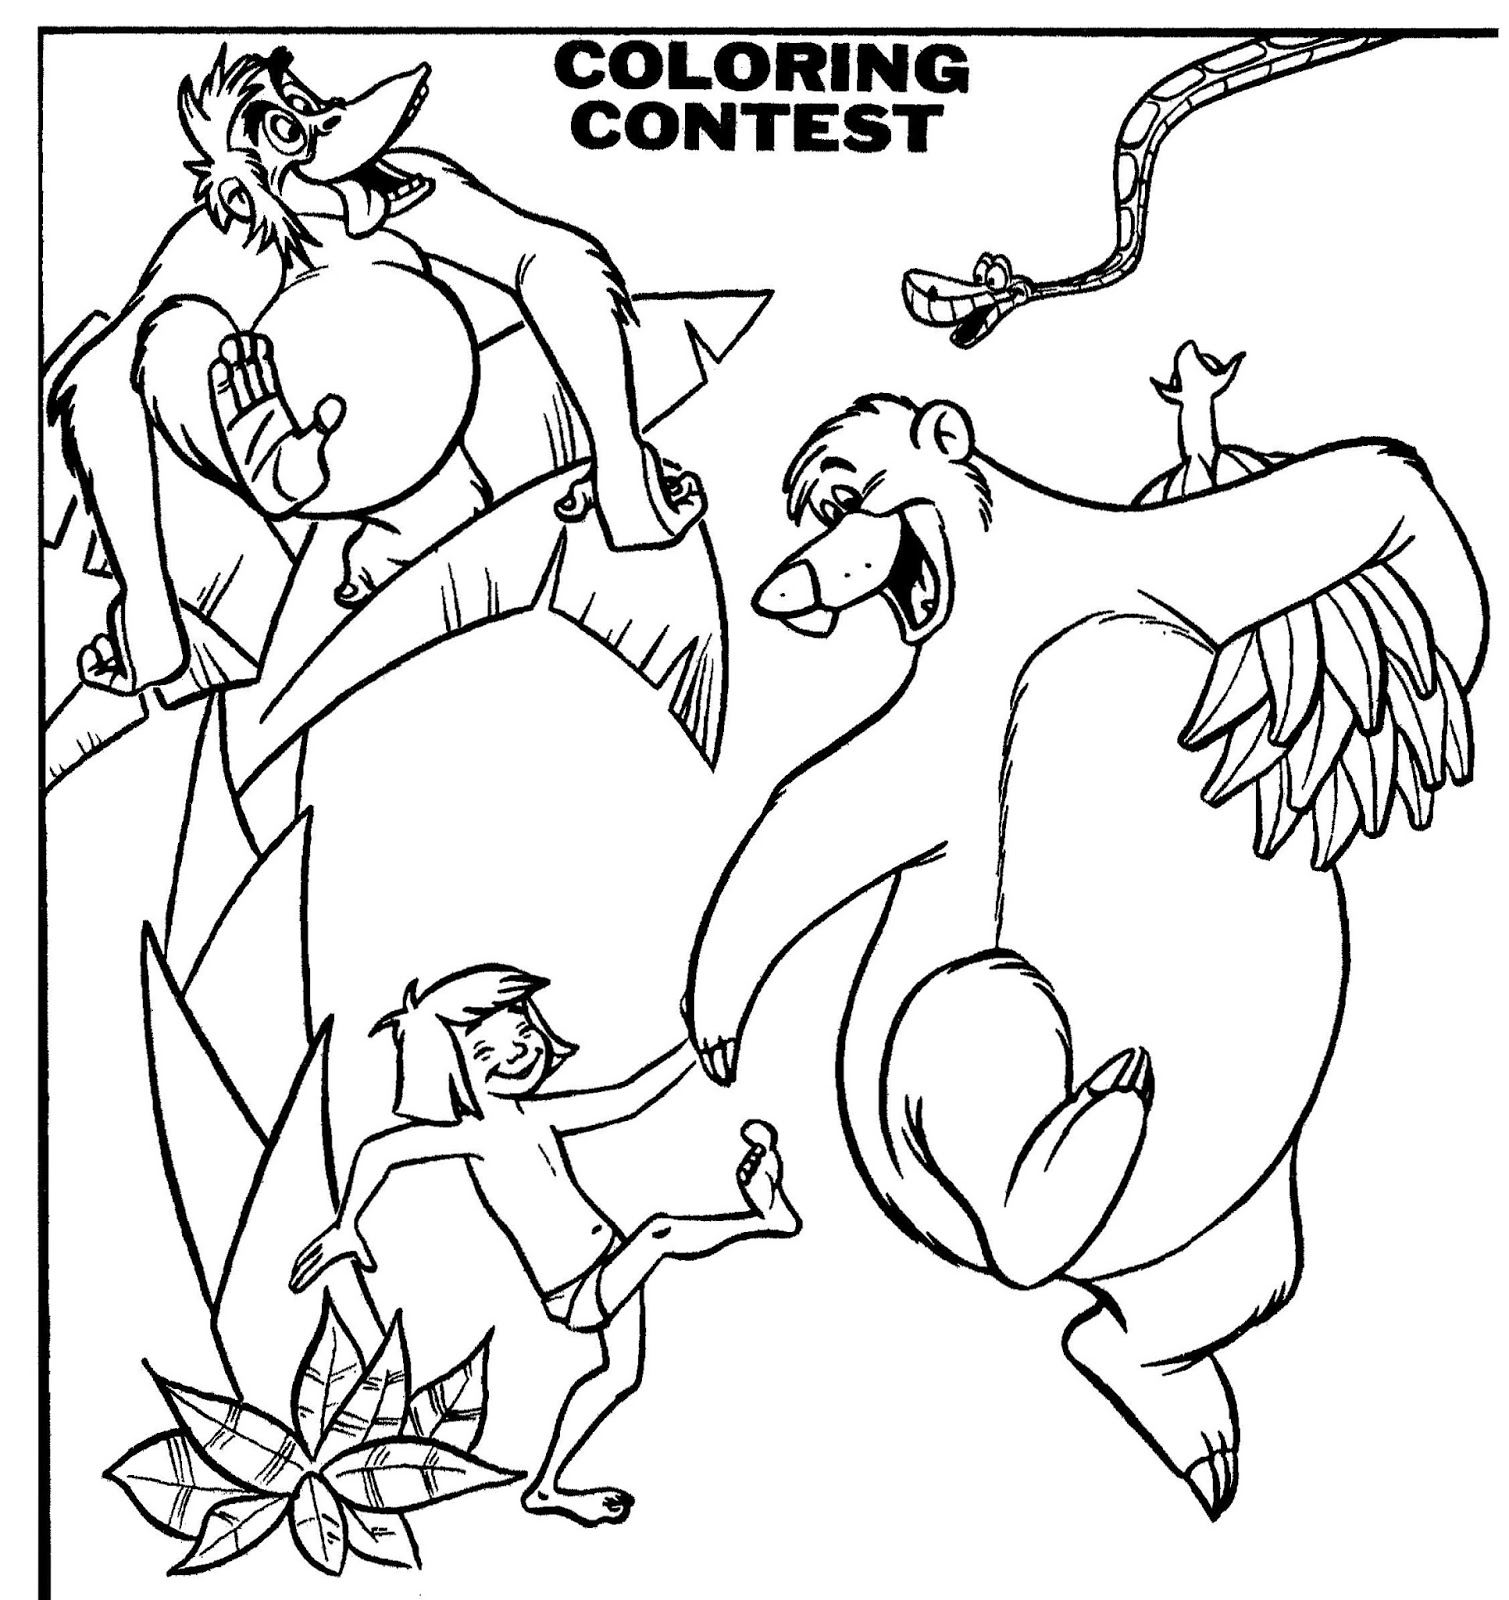 Mostly Paper Dolls Too!: THE JUNGLE BOOK Coloring Contest